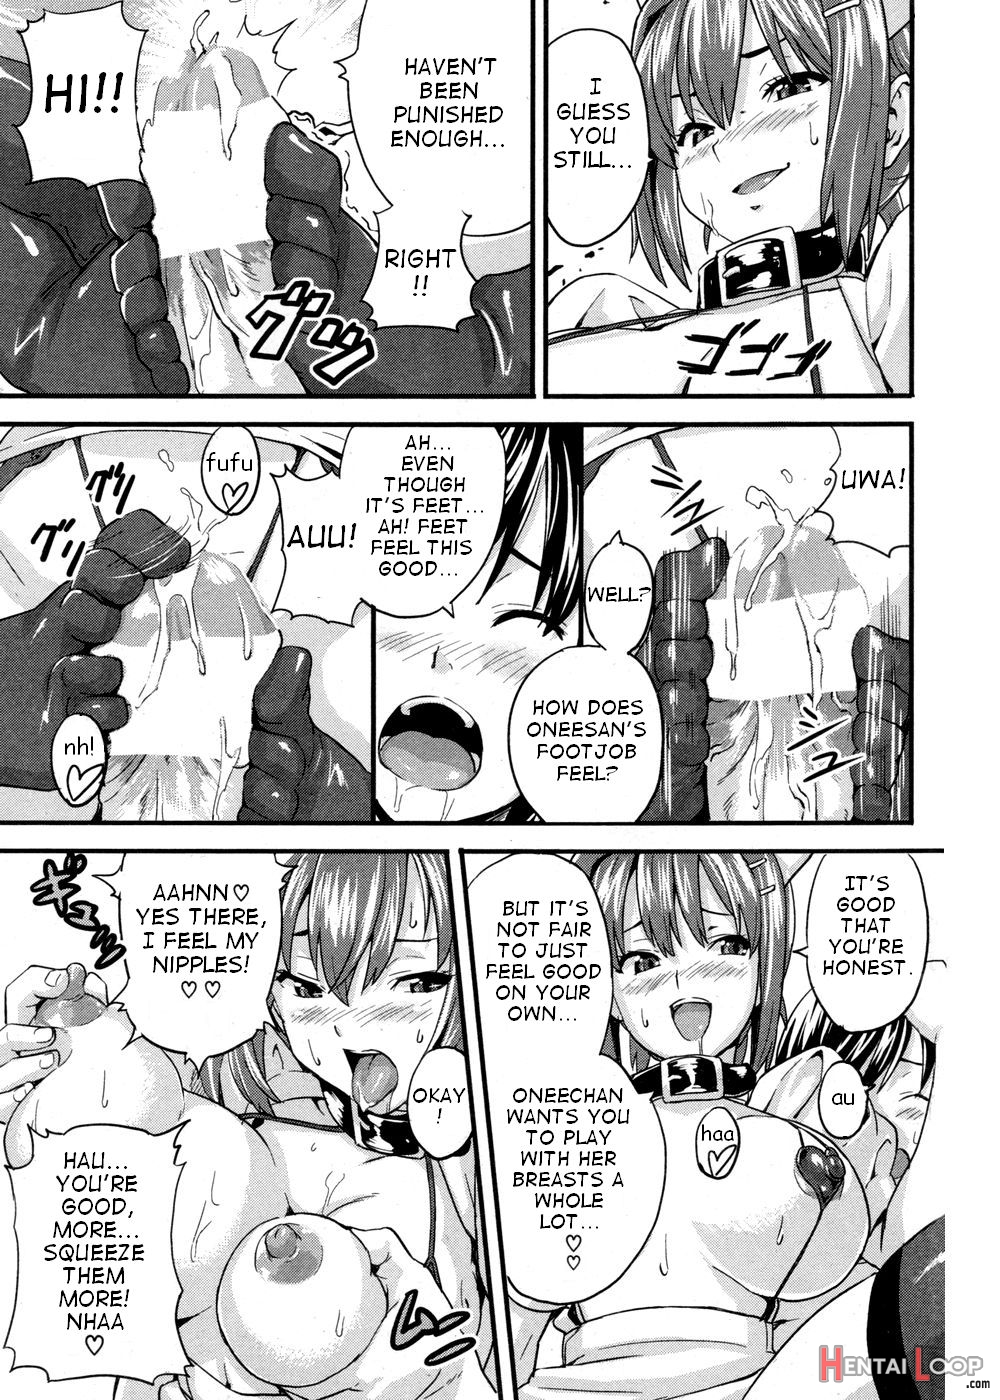 Sister Breeder Chapter 1-8 Chapter 1-4 And 7 Uncensored page 237